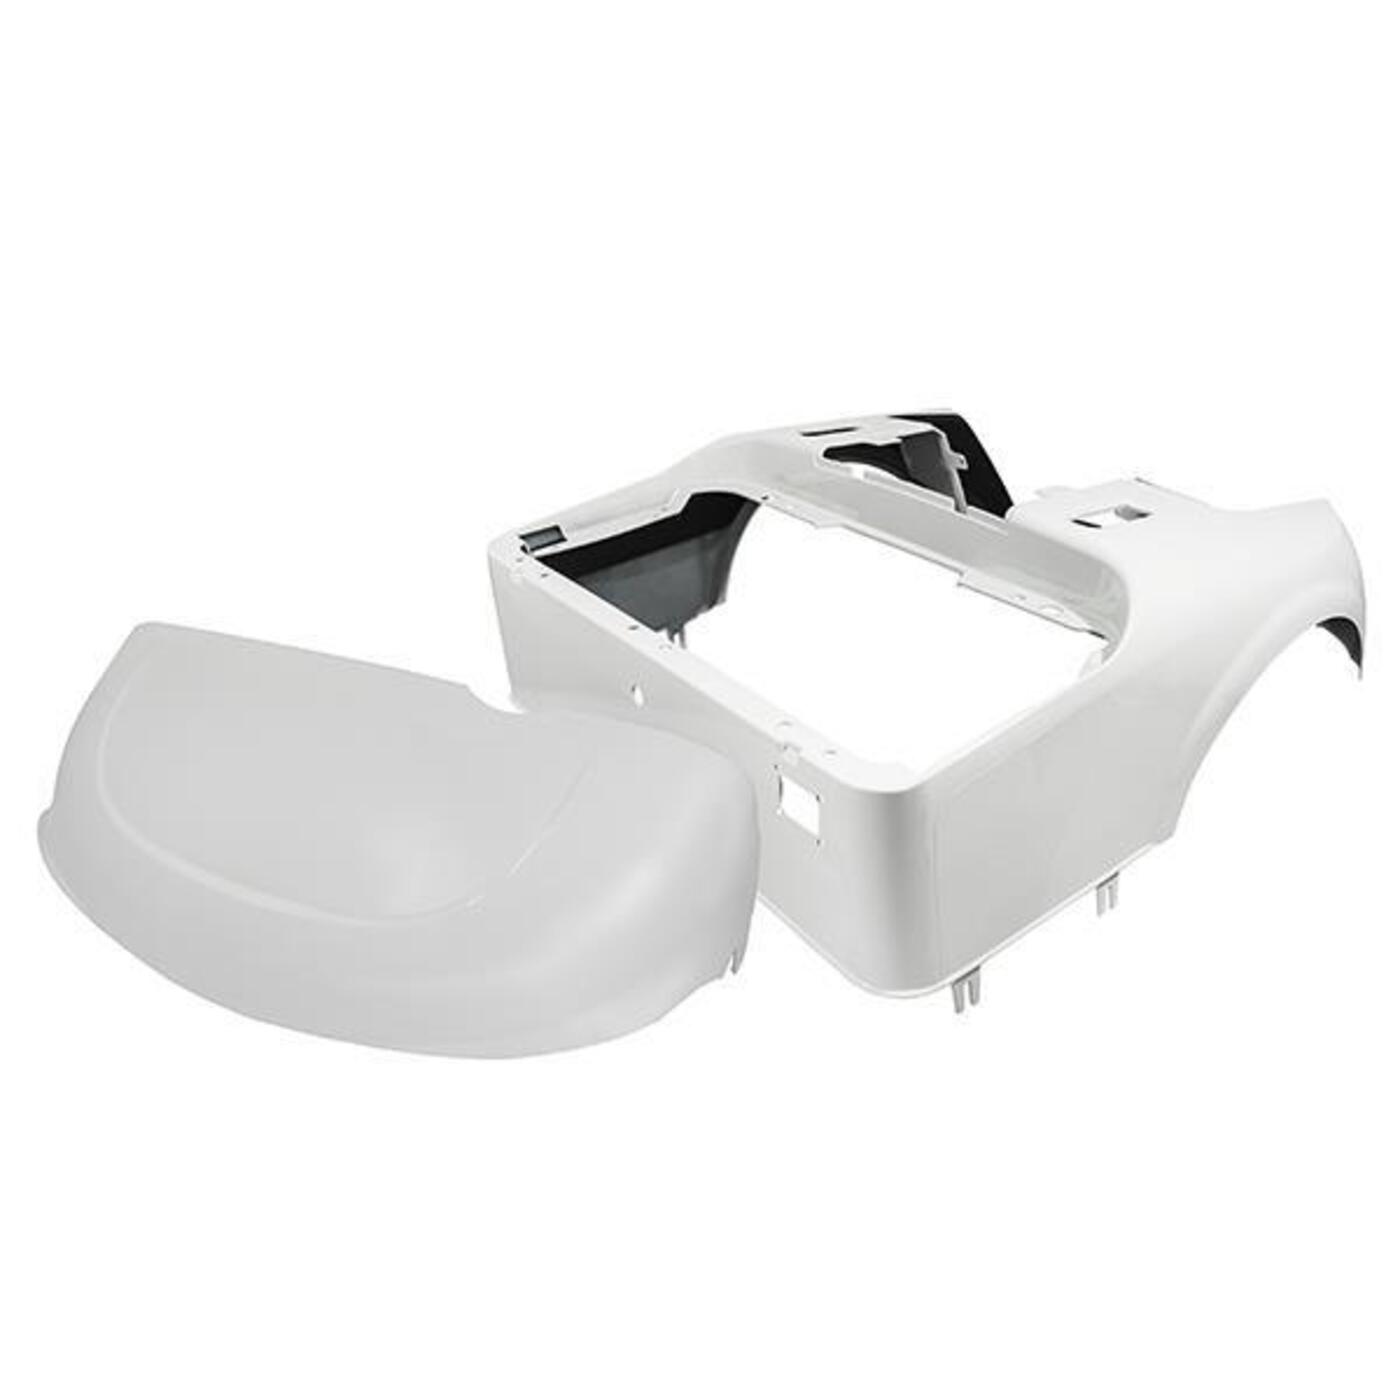 E-Z-GO RXV OEM Bright White Front & Rear Body Kit Years 2016-Up 18-180